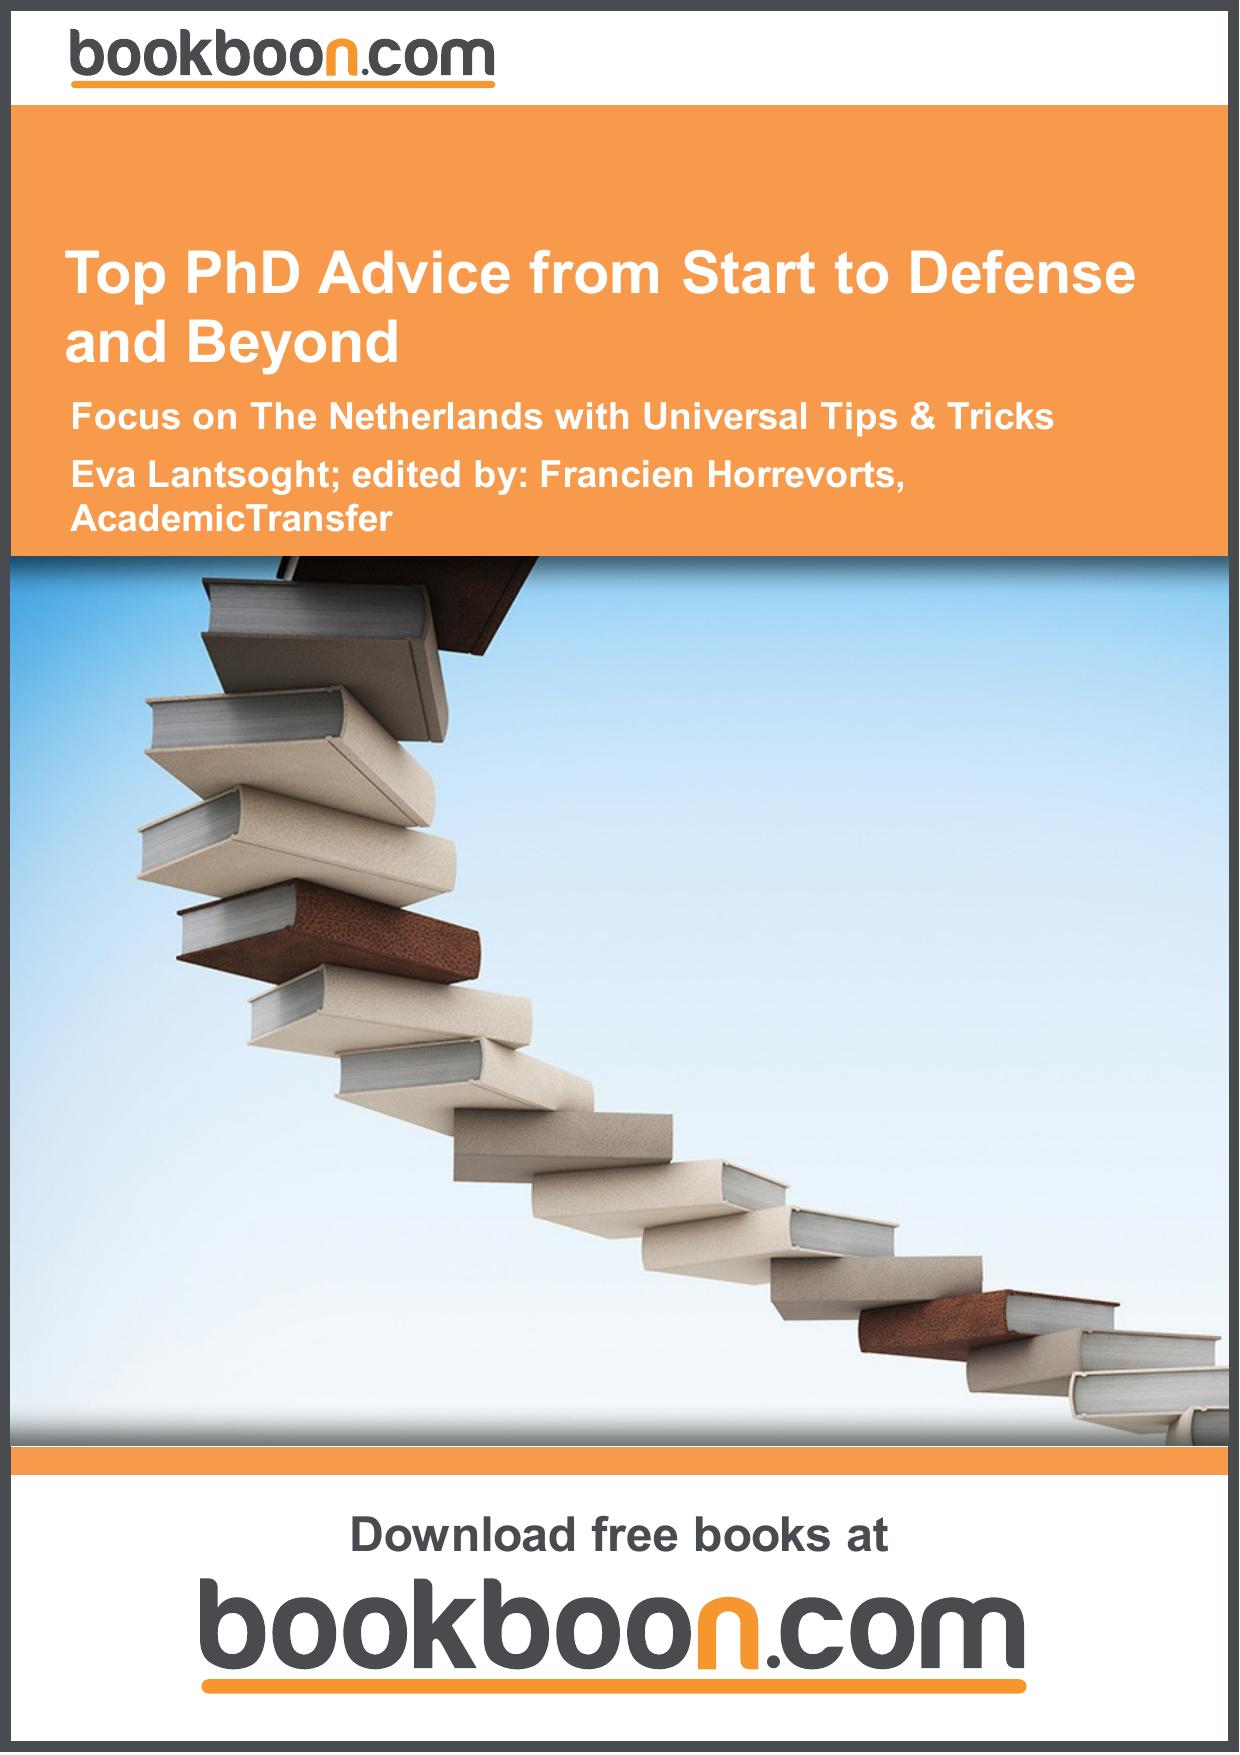 Top PhD Advice from Start to Defense and Beyond